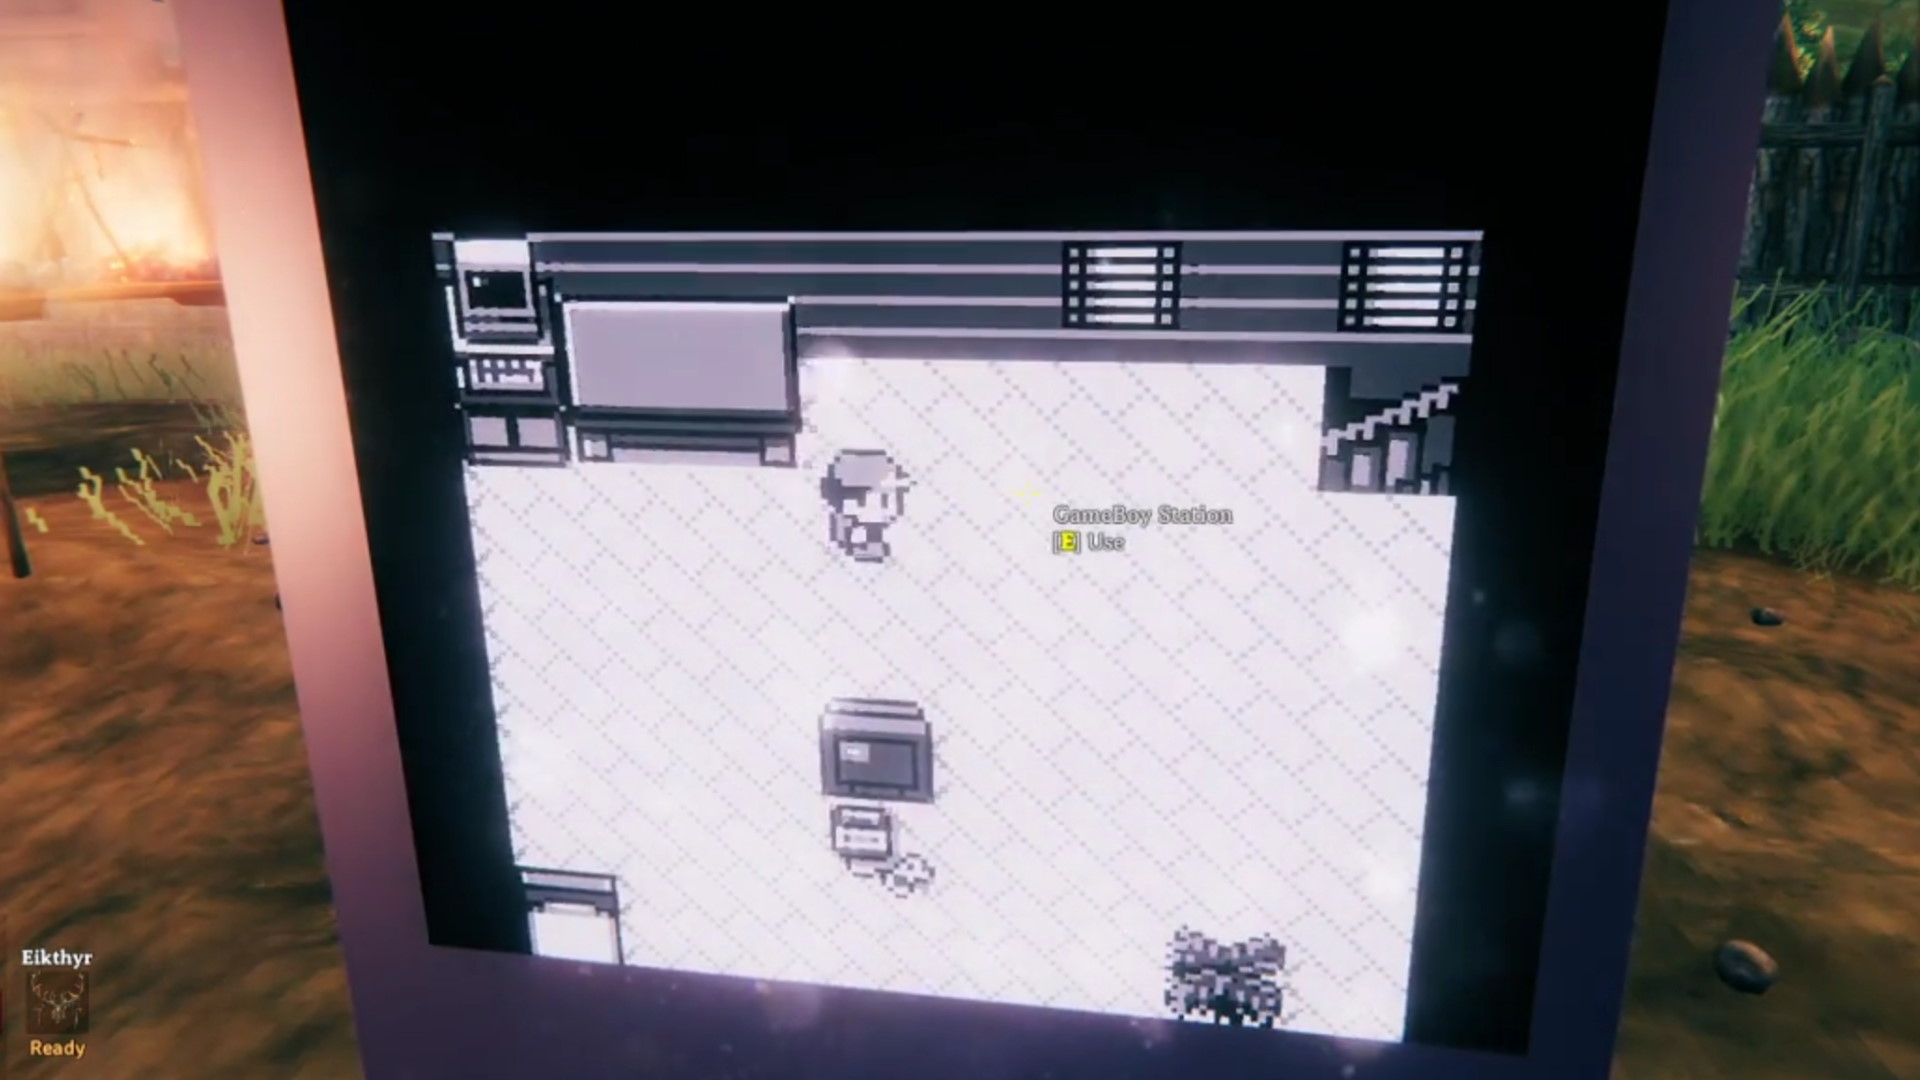 Valheim Game Boy emulator lets you play Pokemon Yellow in your